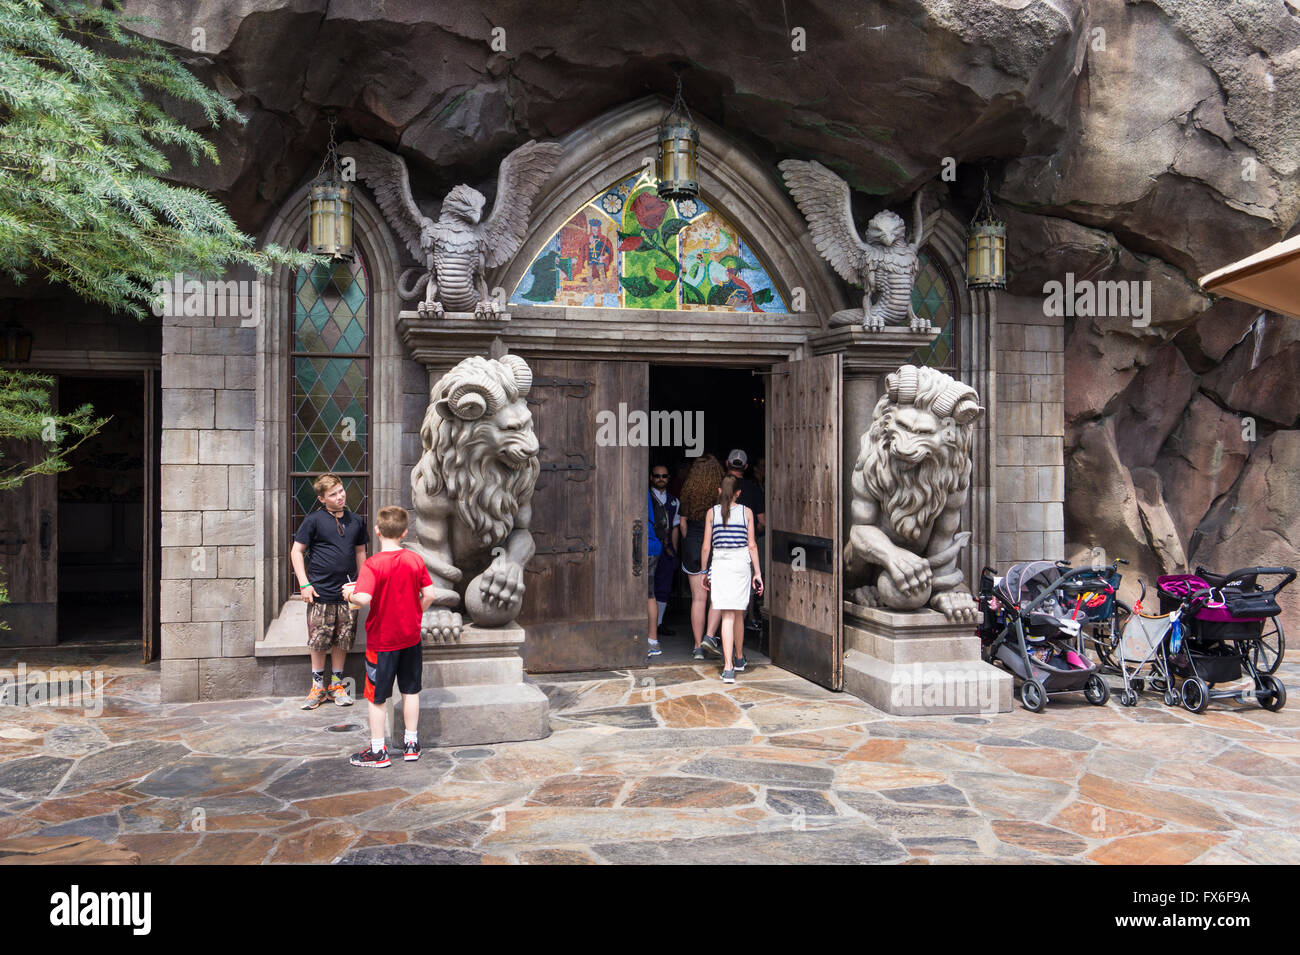 Entrance To Be Our Guest Restaurant In Fantasyland In Magic Kingdom Theme Park In Walt Disney World Orlando Florida Stock Photo Alamy